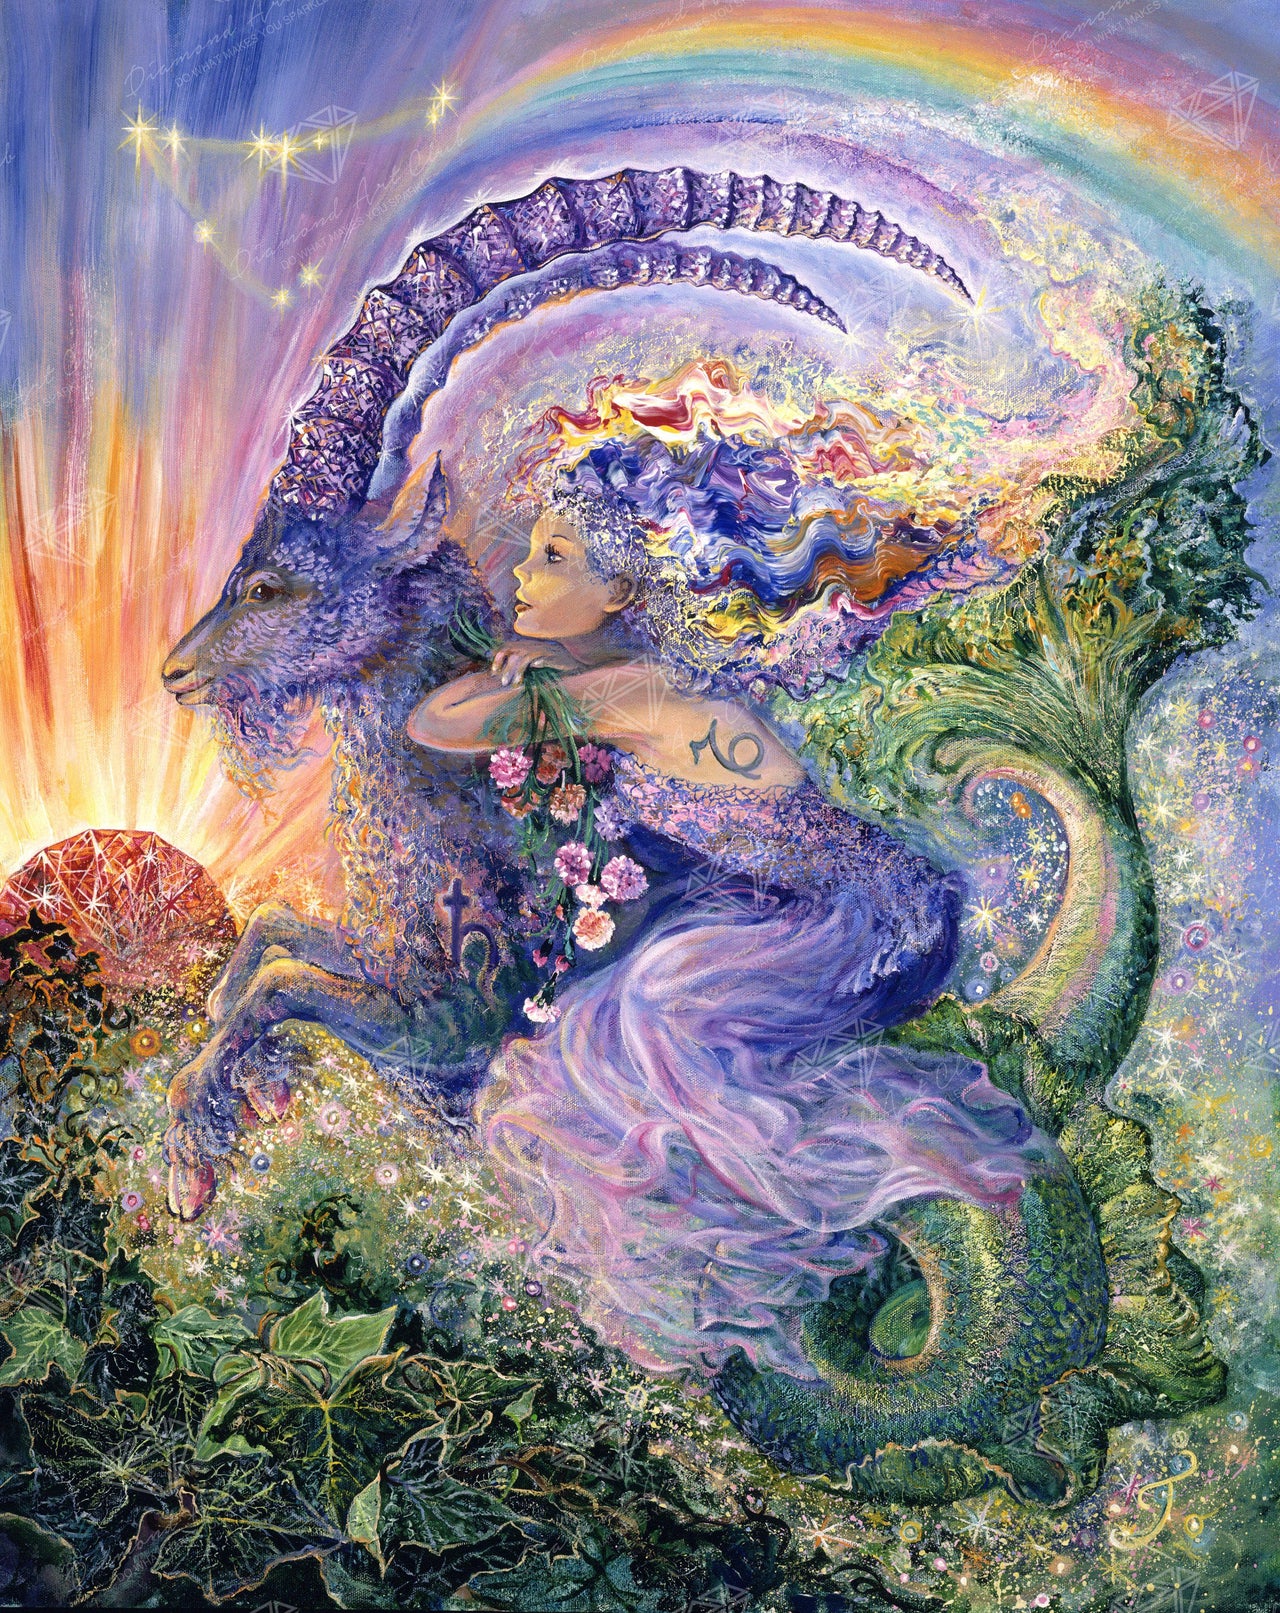 Diamond Painting Capricorn 27.6" x 34.7″ (70cm x 88cm) / Square with 64 Colors including 4 ABs / 96,672